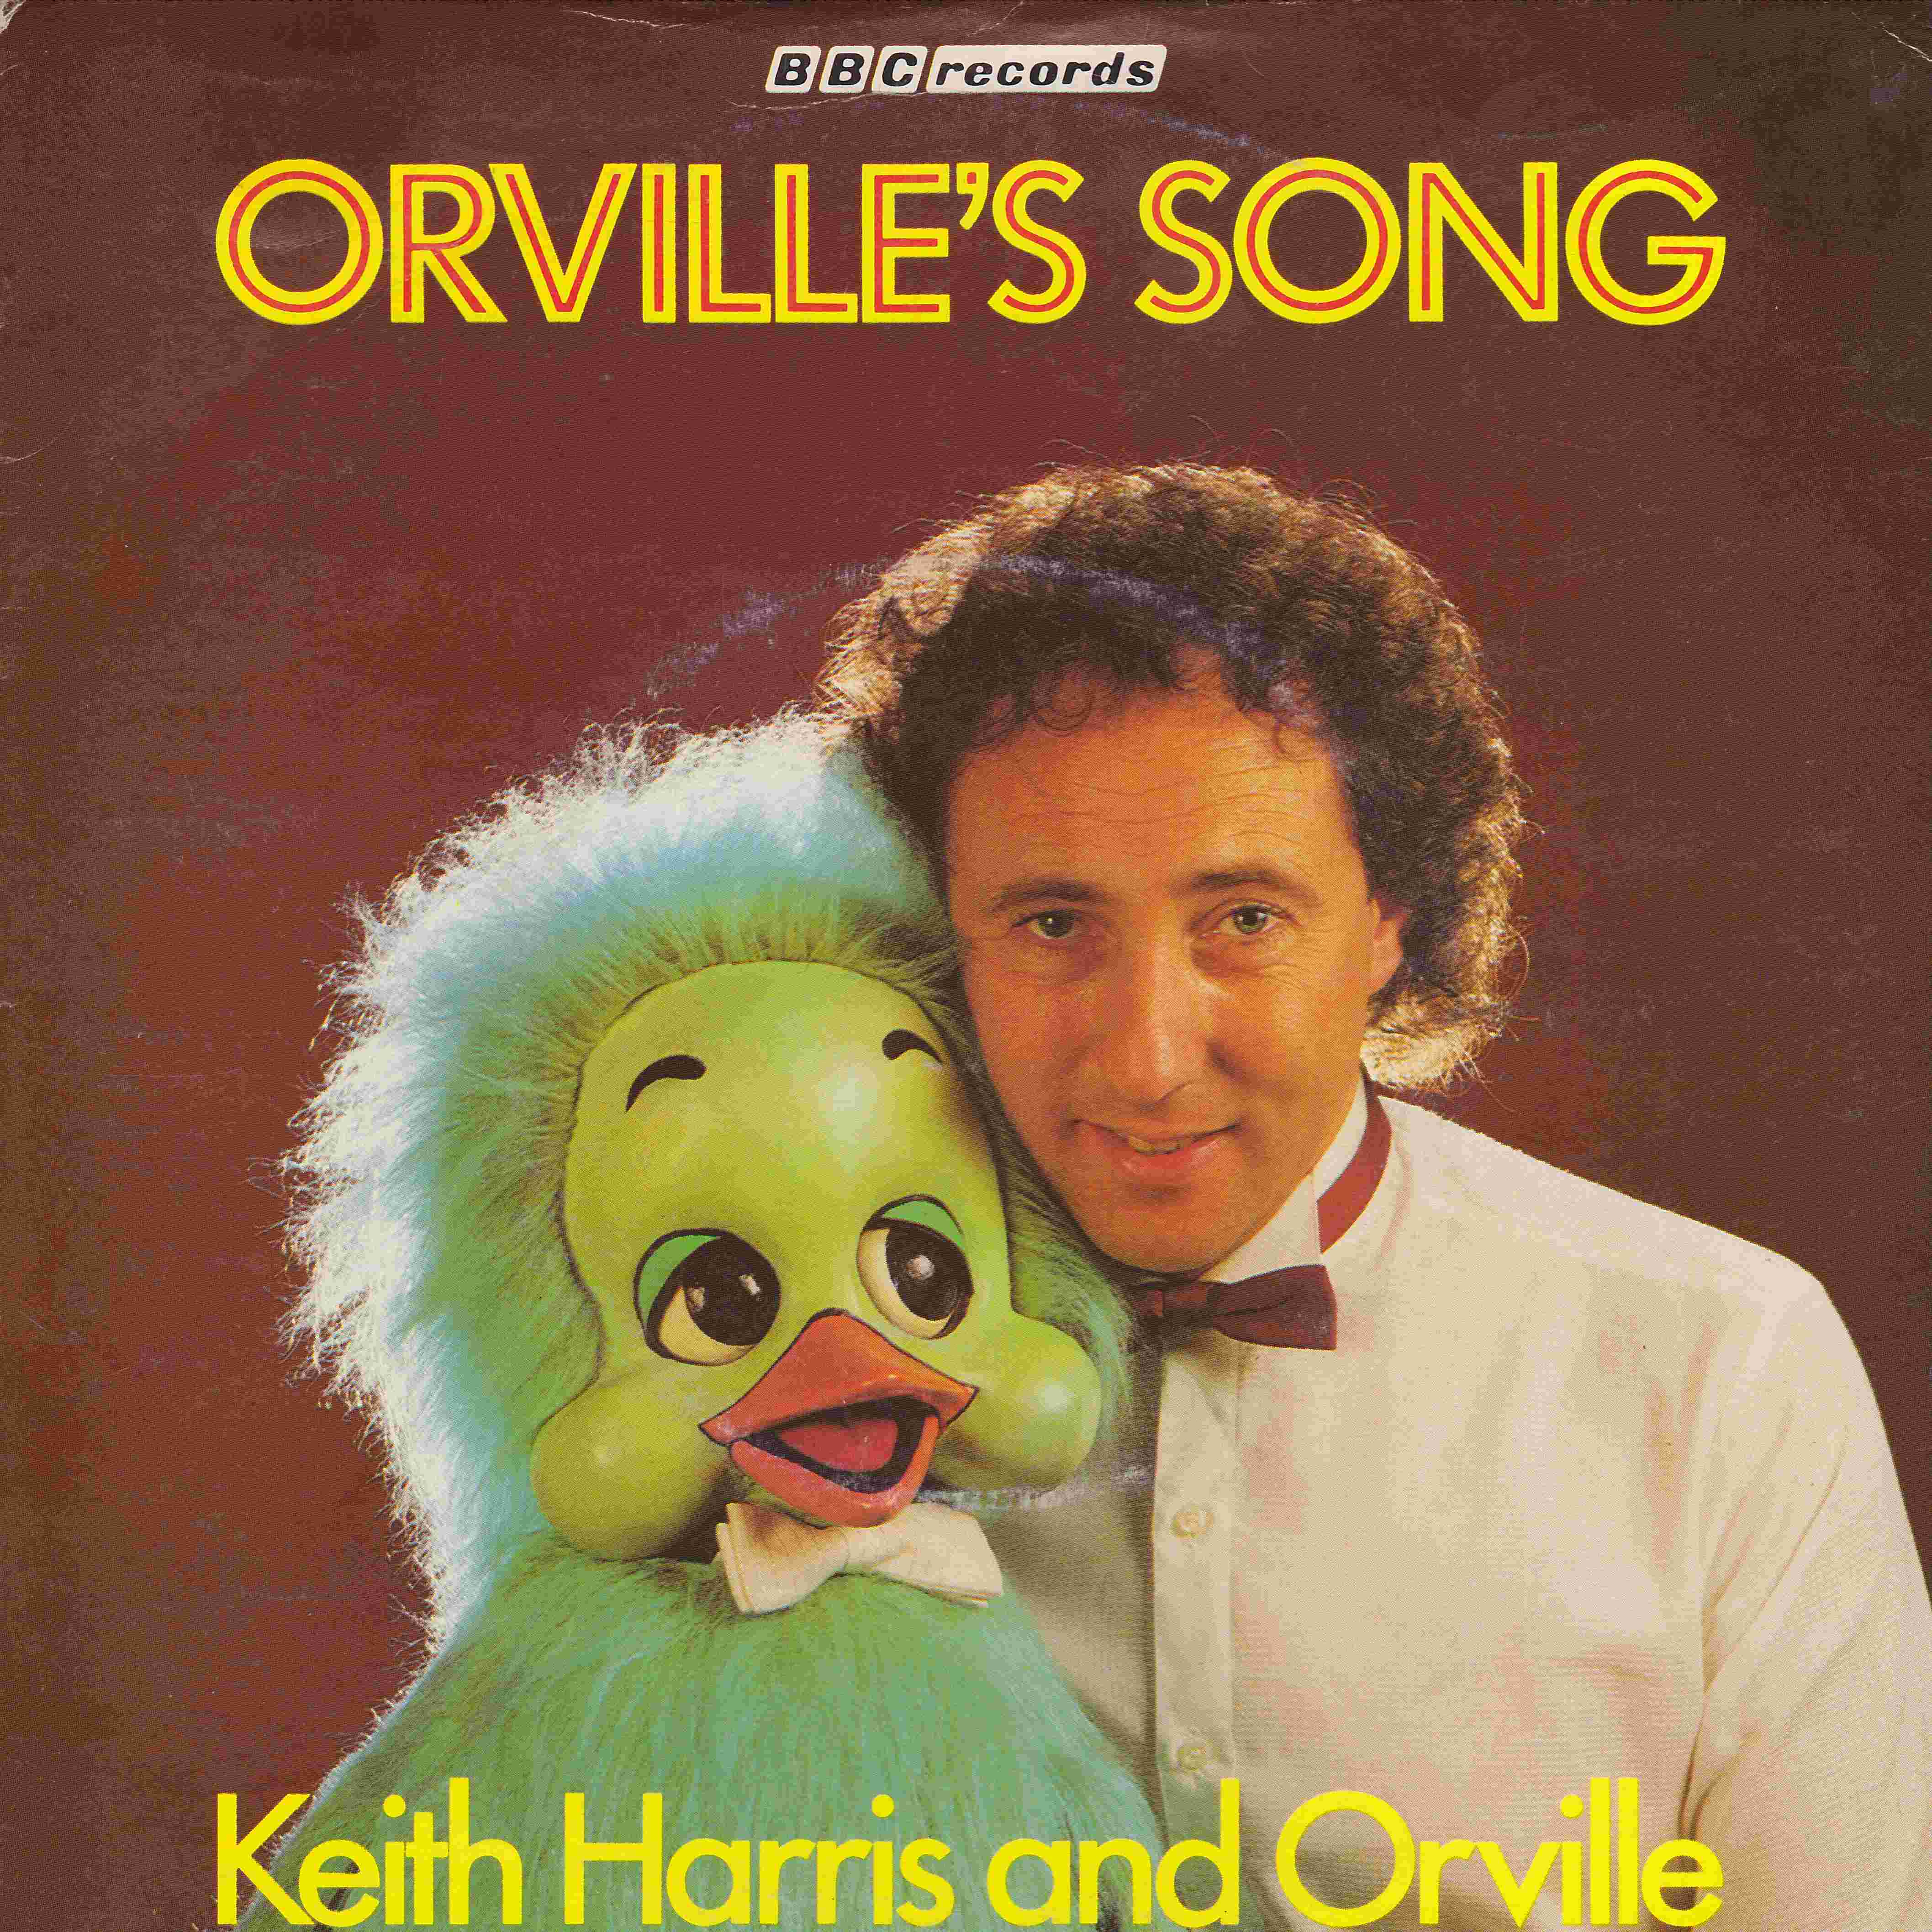 Picture of RESL 124 Orville's song single by artist Keith Harris and Orville from the BBC records and Tapes library